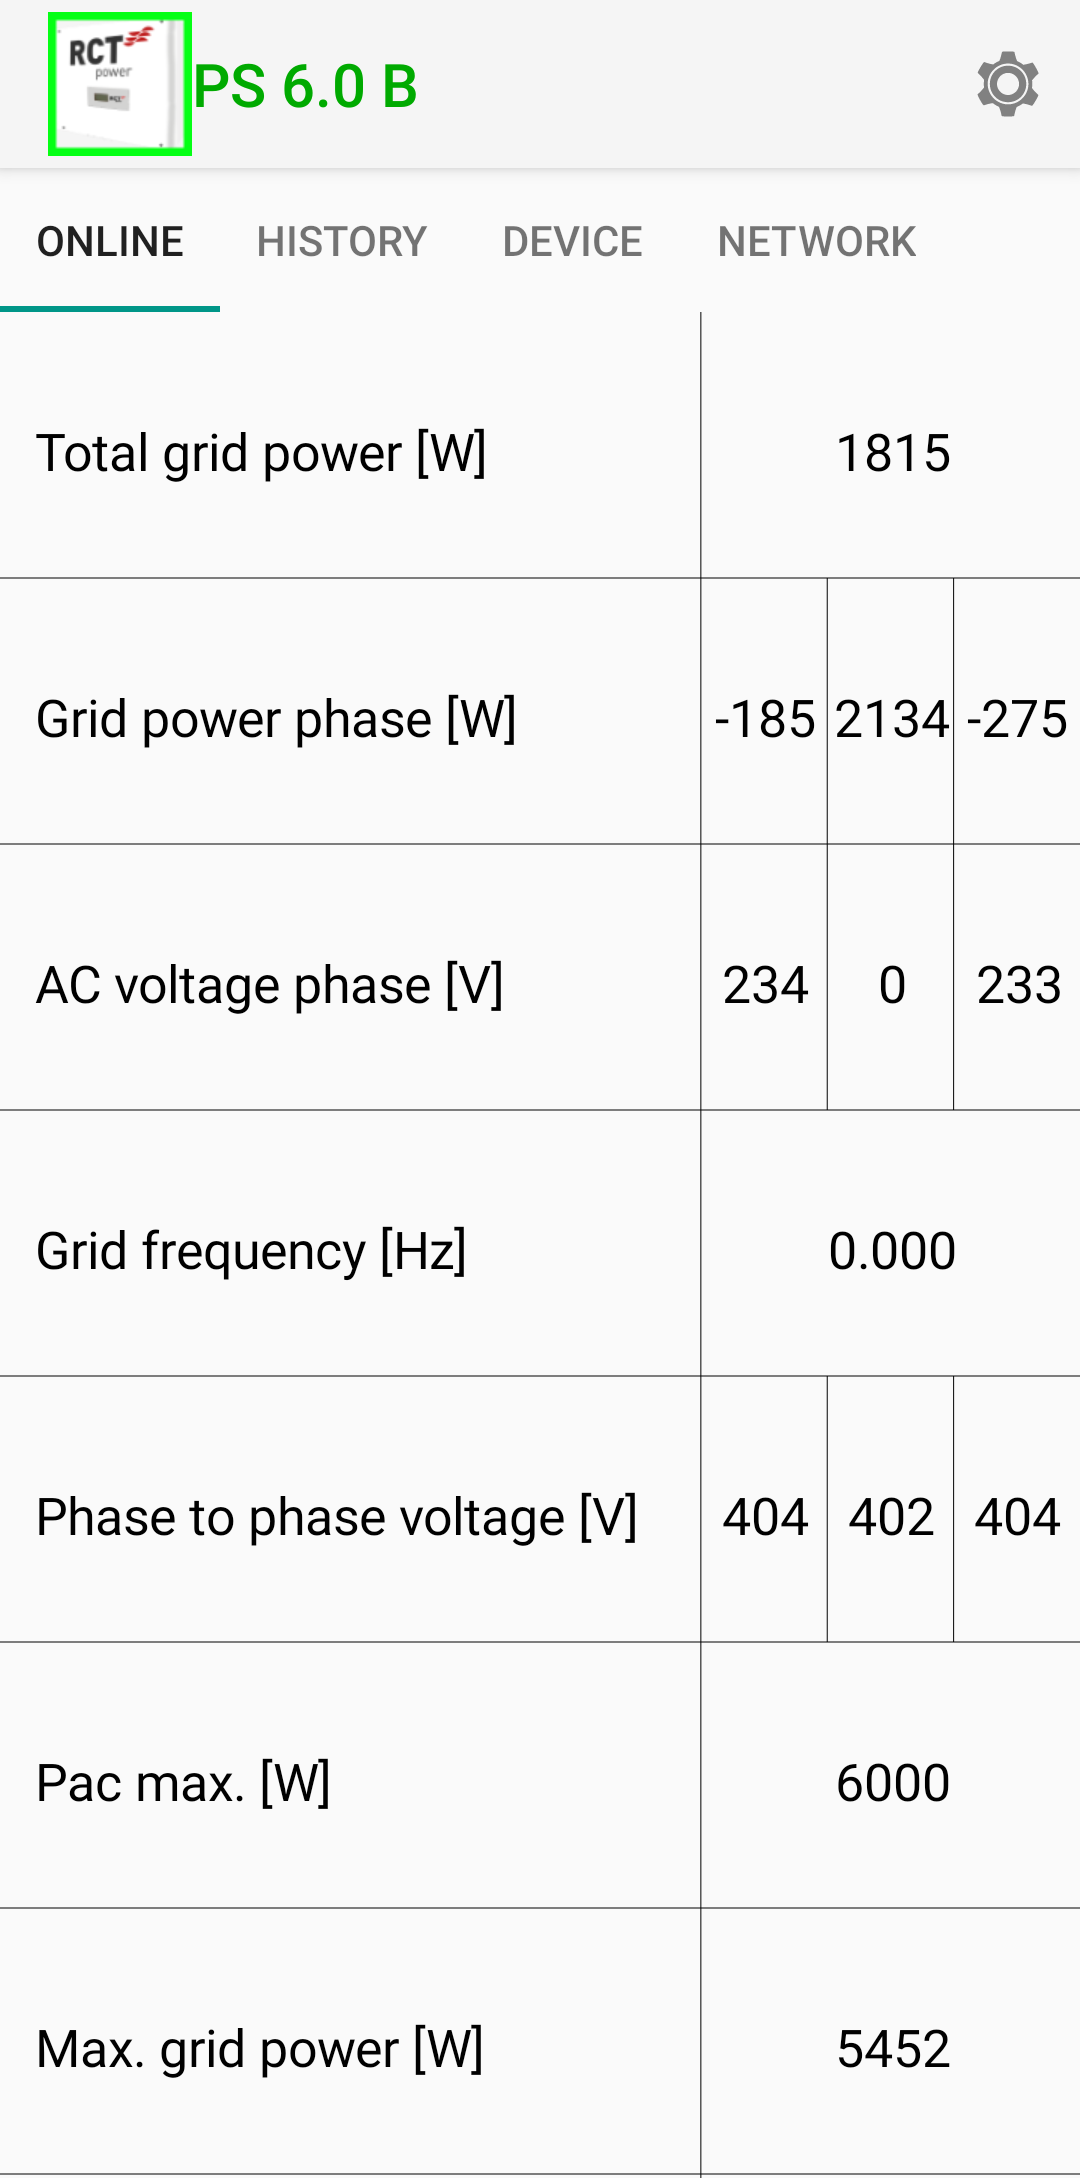 RCT Power App (Android) view of the power grid. The tabular view shows a set of values that are explained in the table following this image.